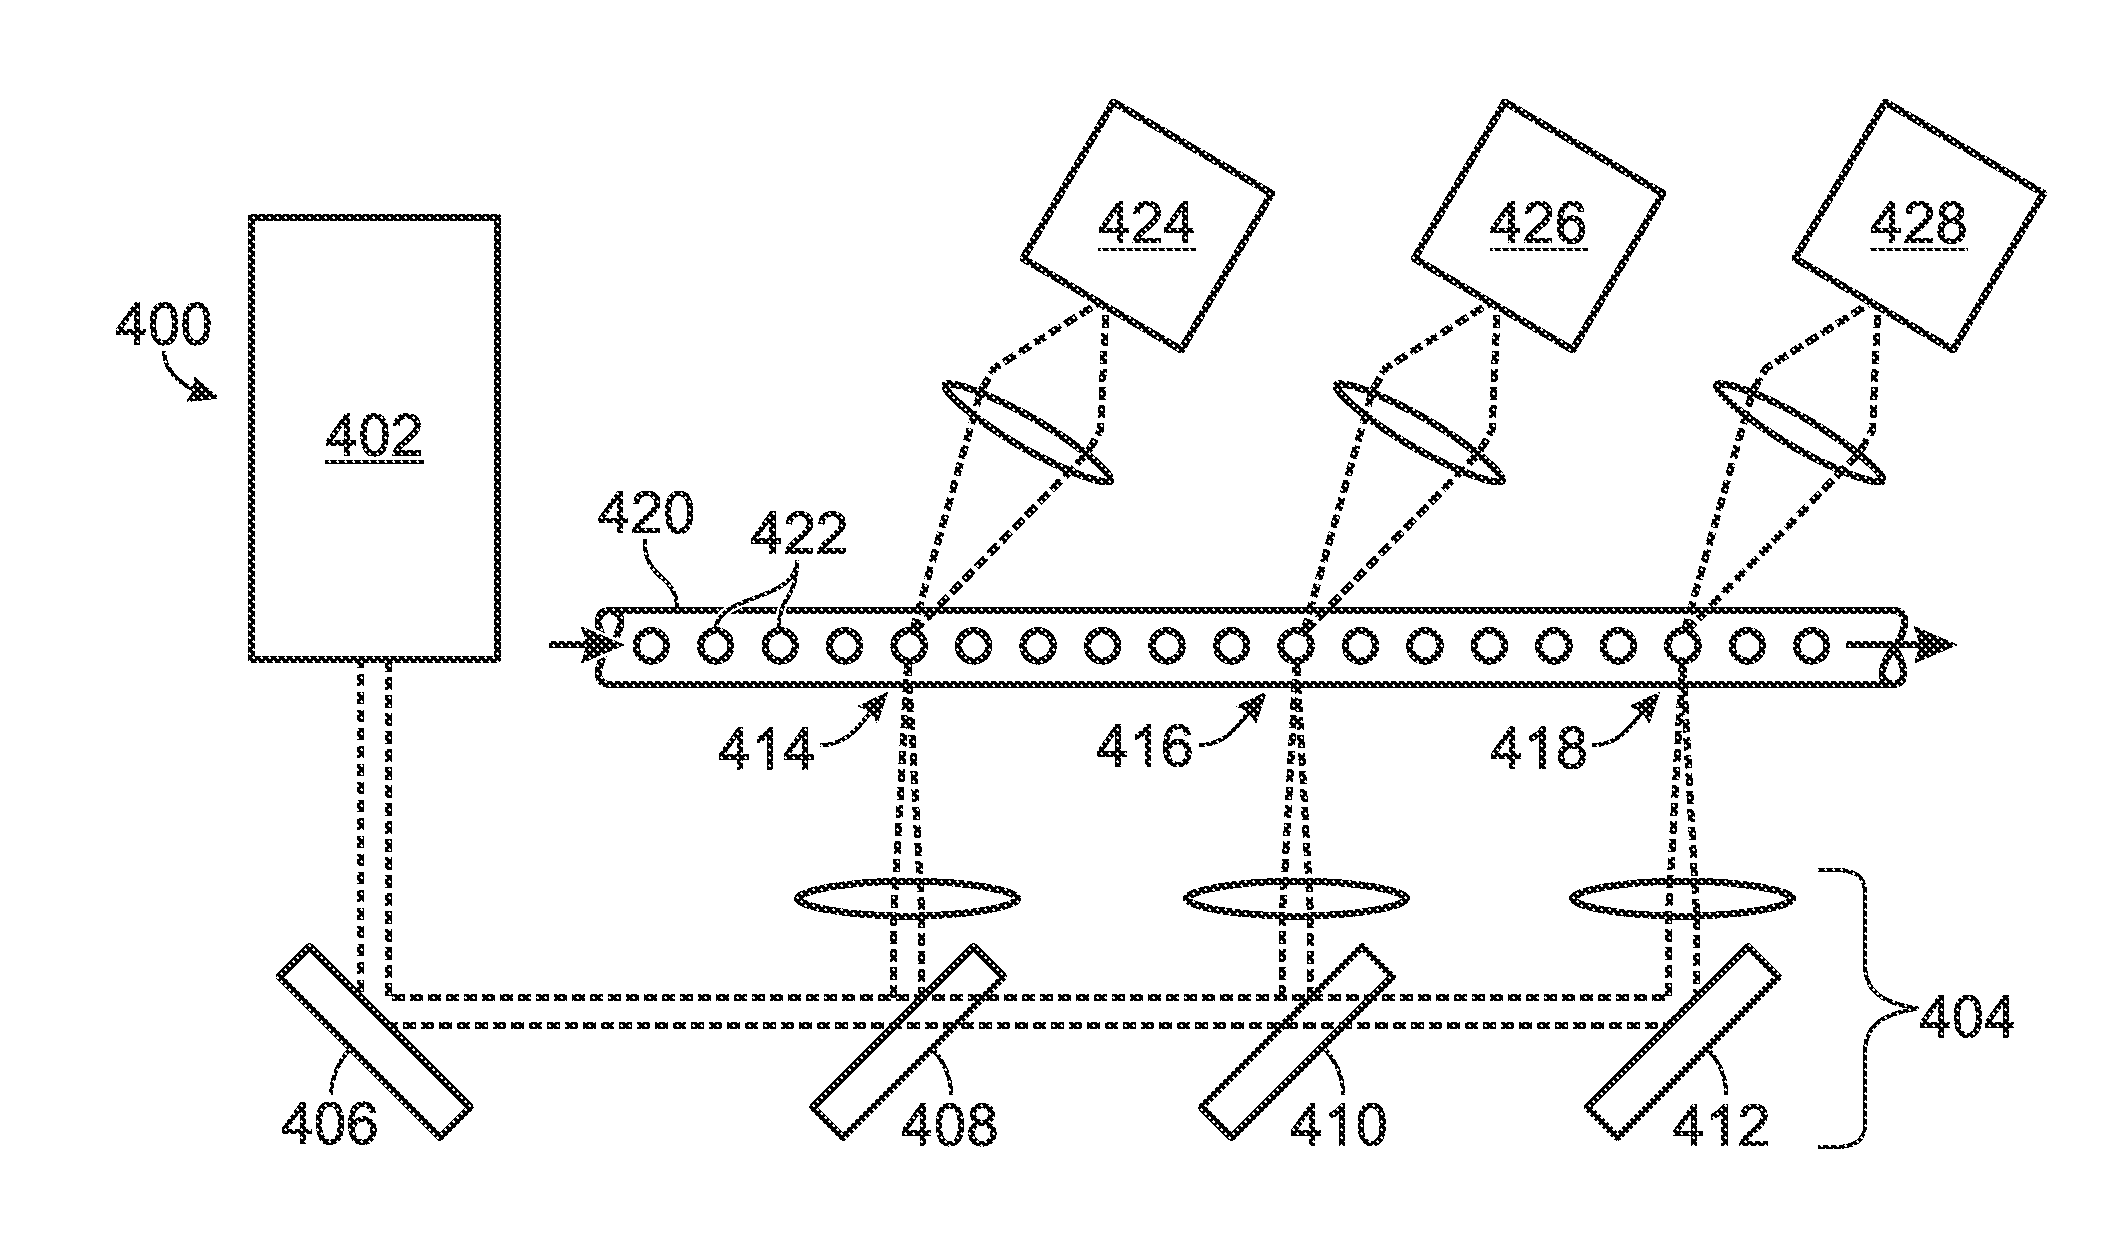 System for detection of spaced droplets